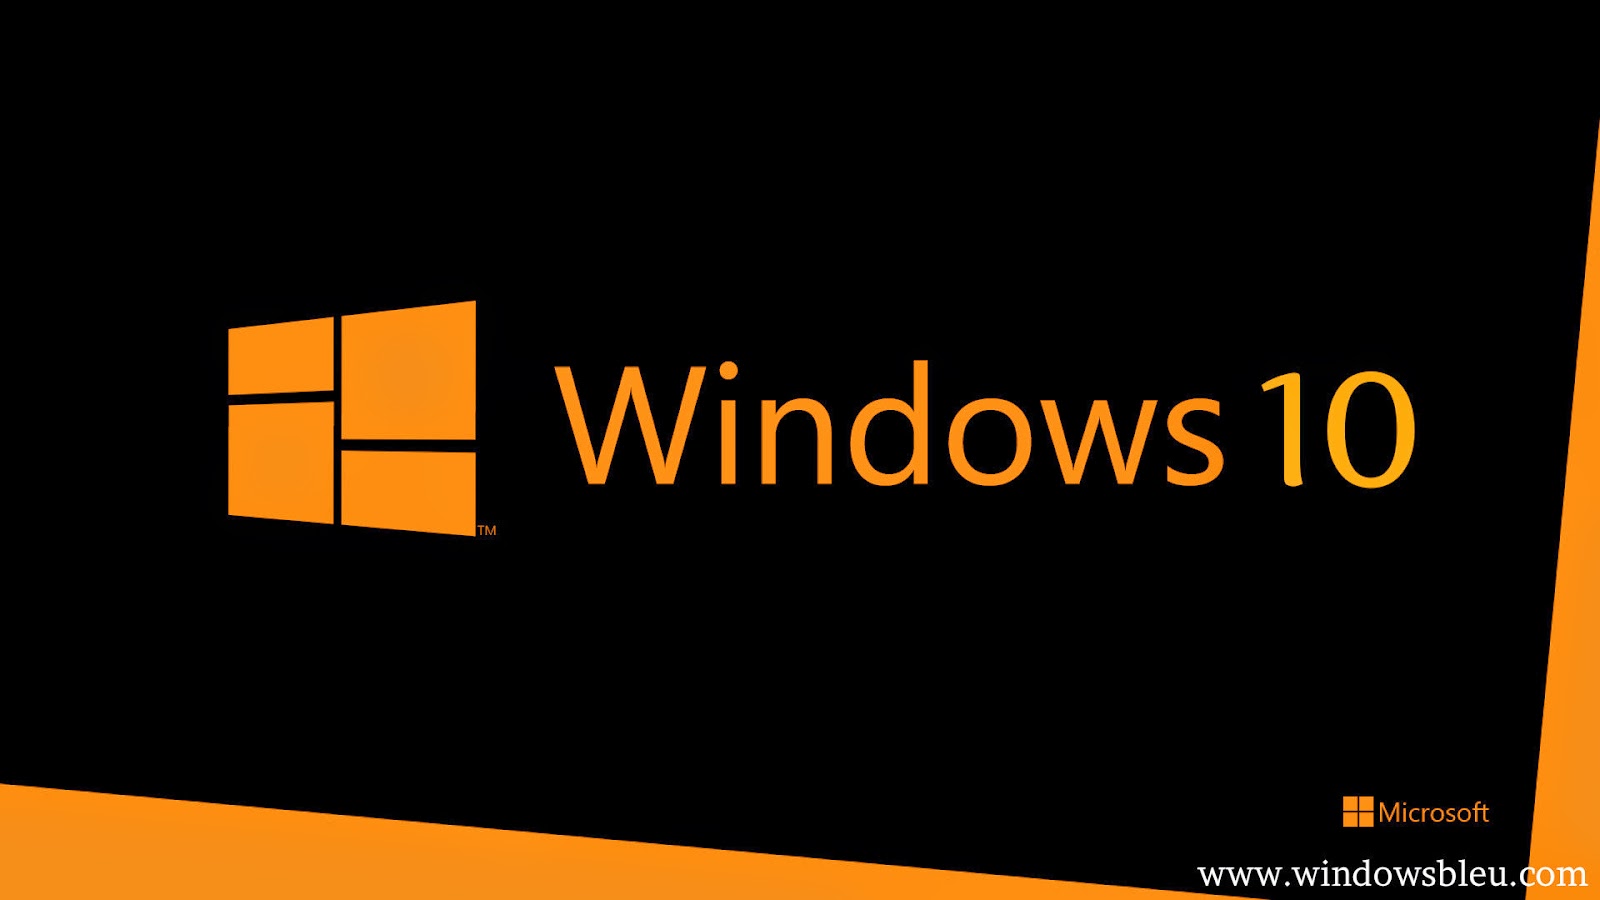 Took The Wraps Off Windows Its Next Major Update To